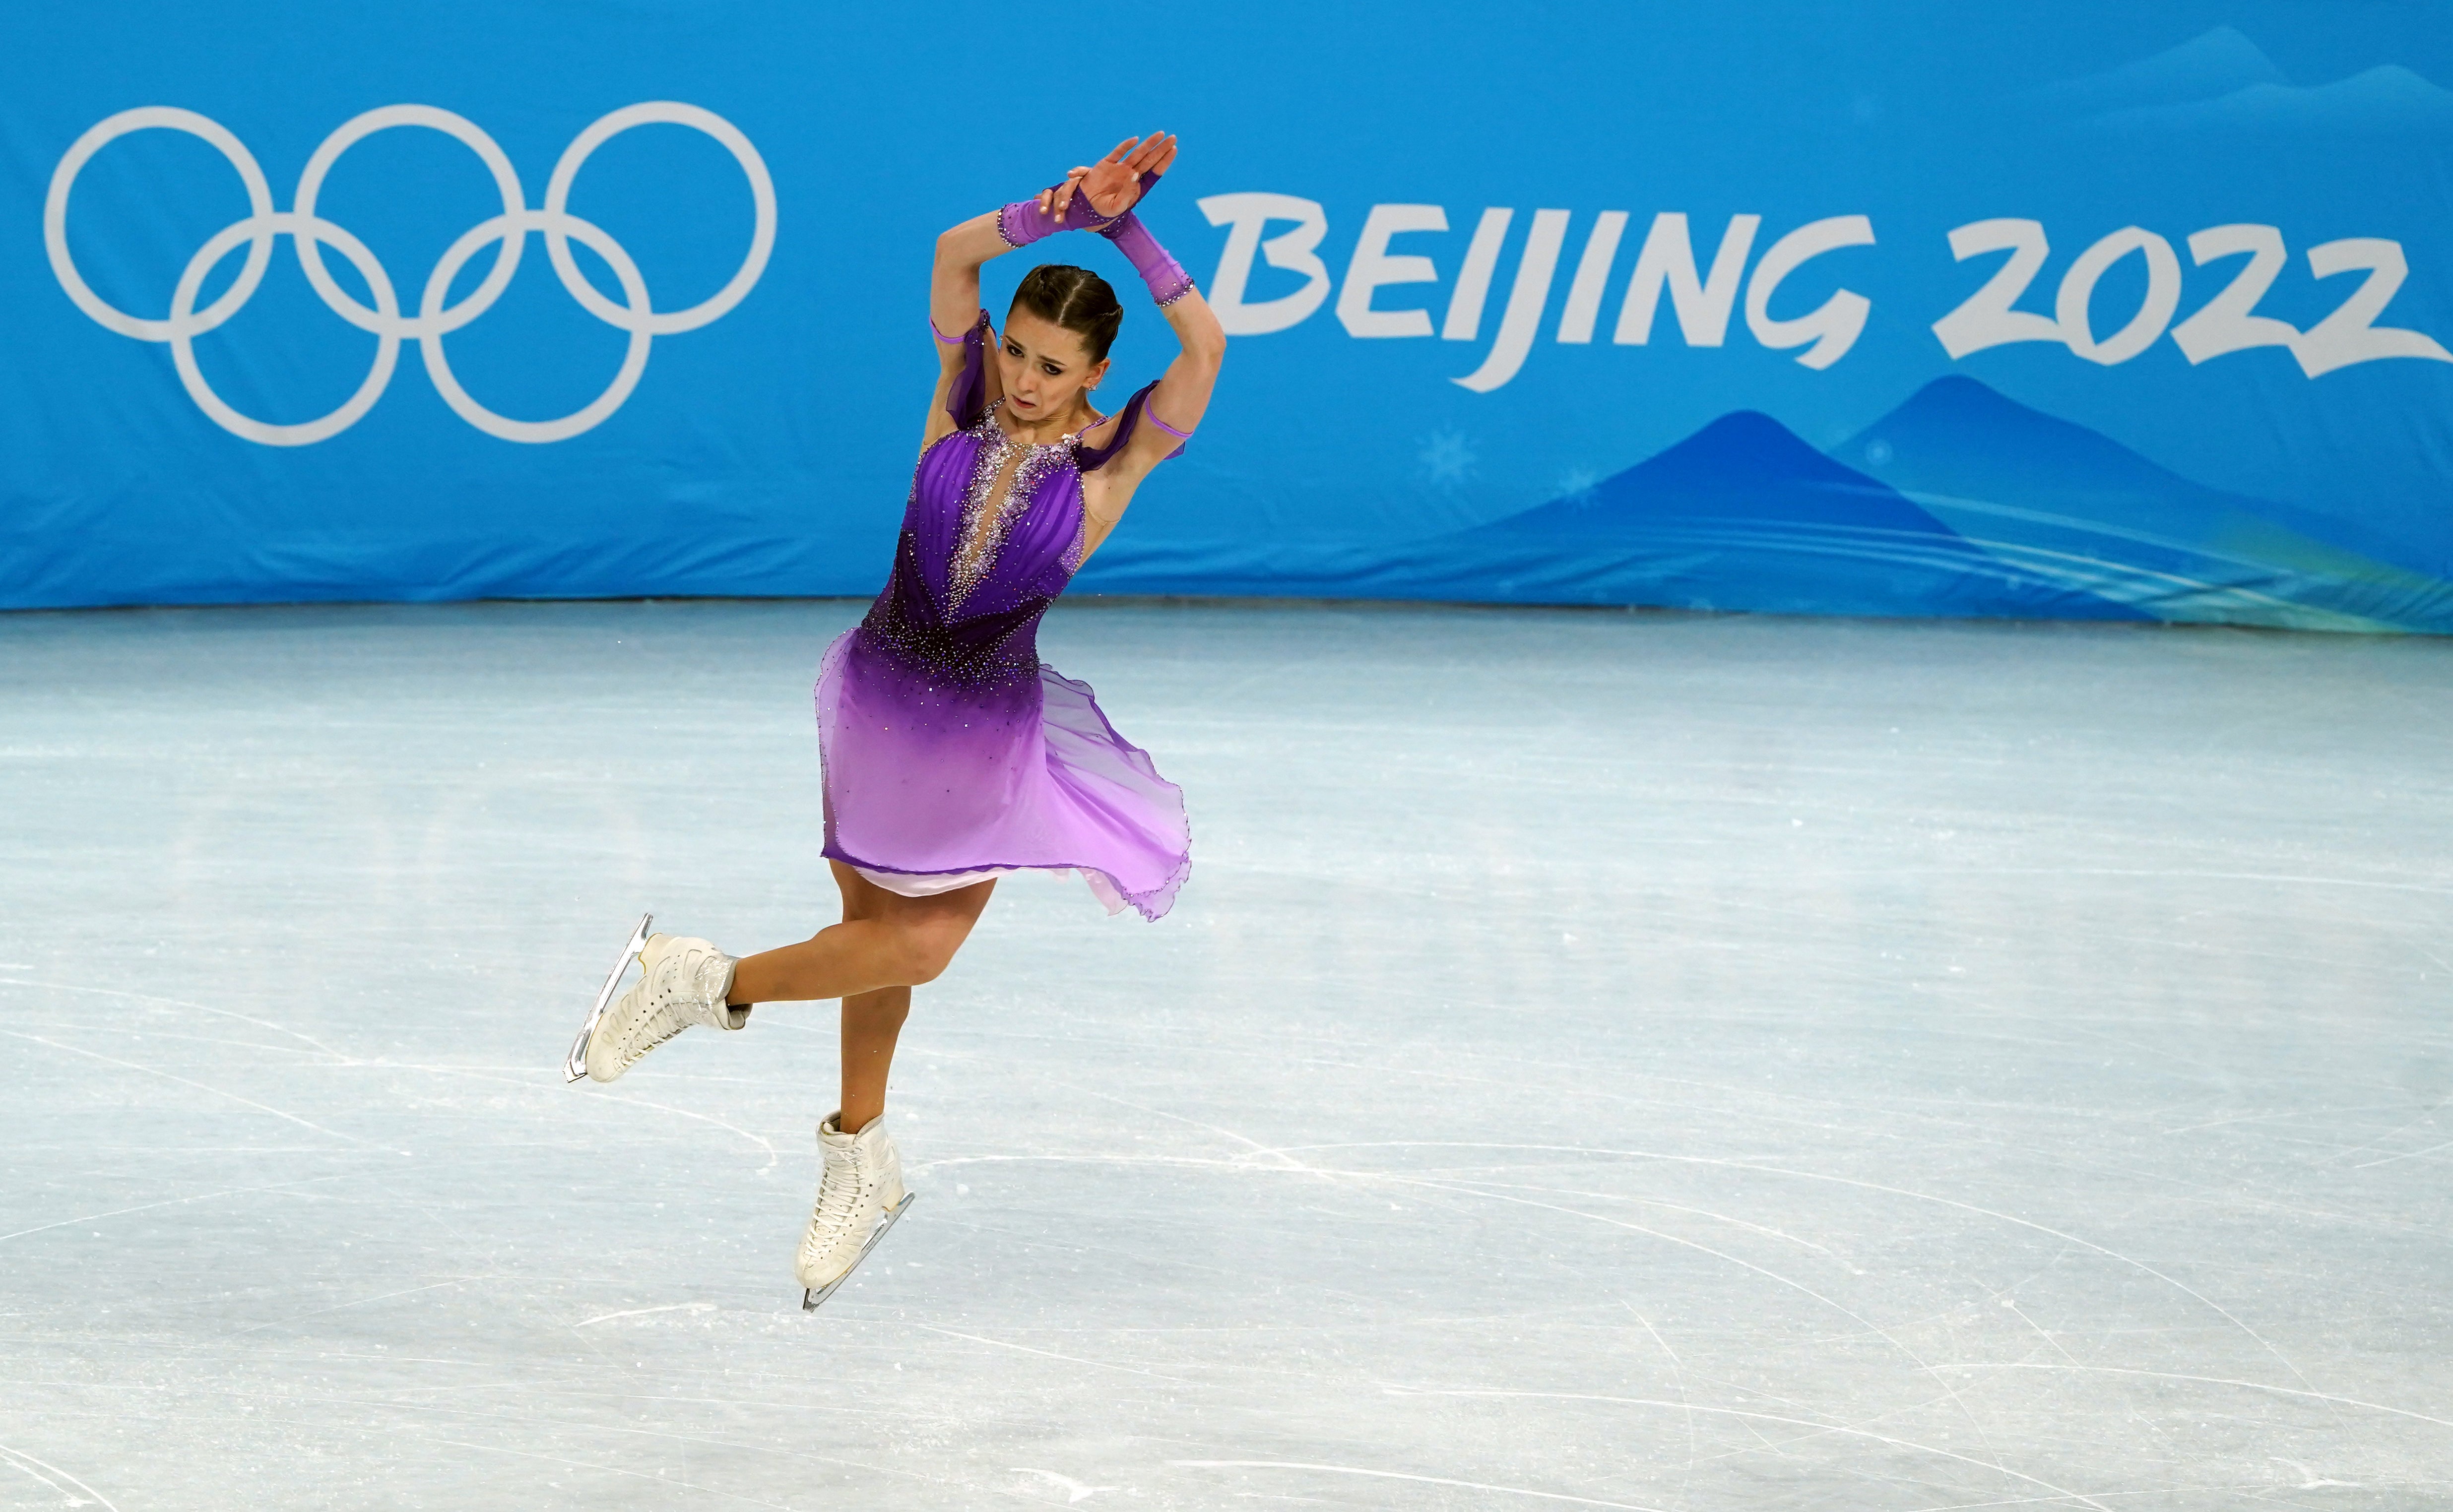 Kamila Valieva Russian 15-year-old figure skater faces Winter Olympics ban after failing drug test The Independent